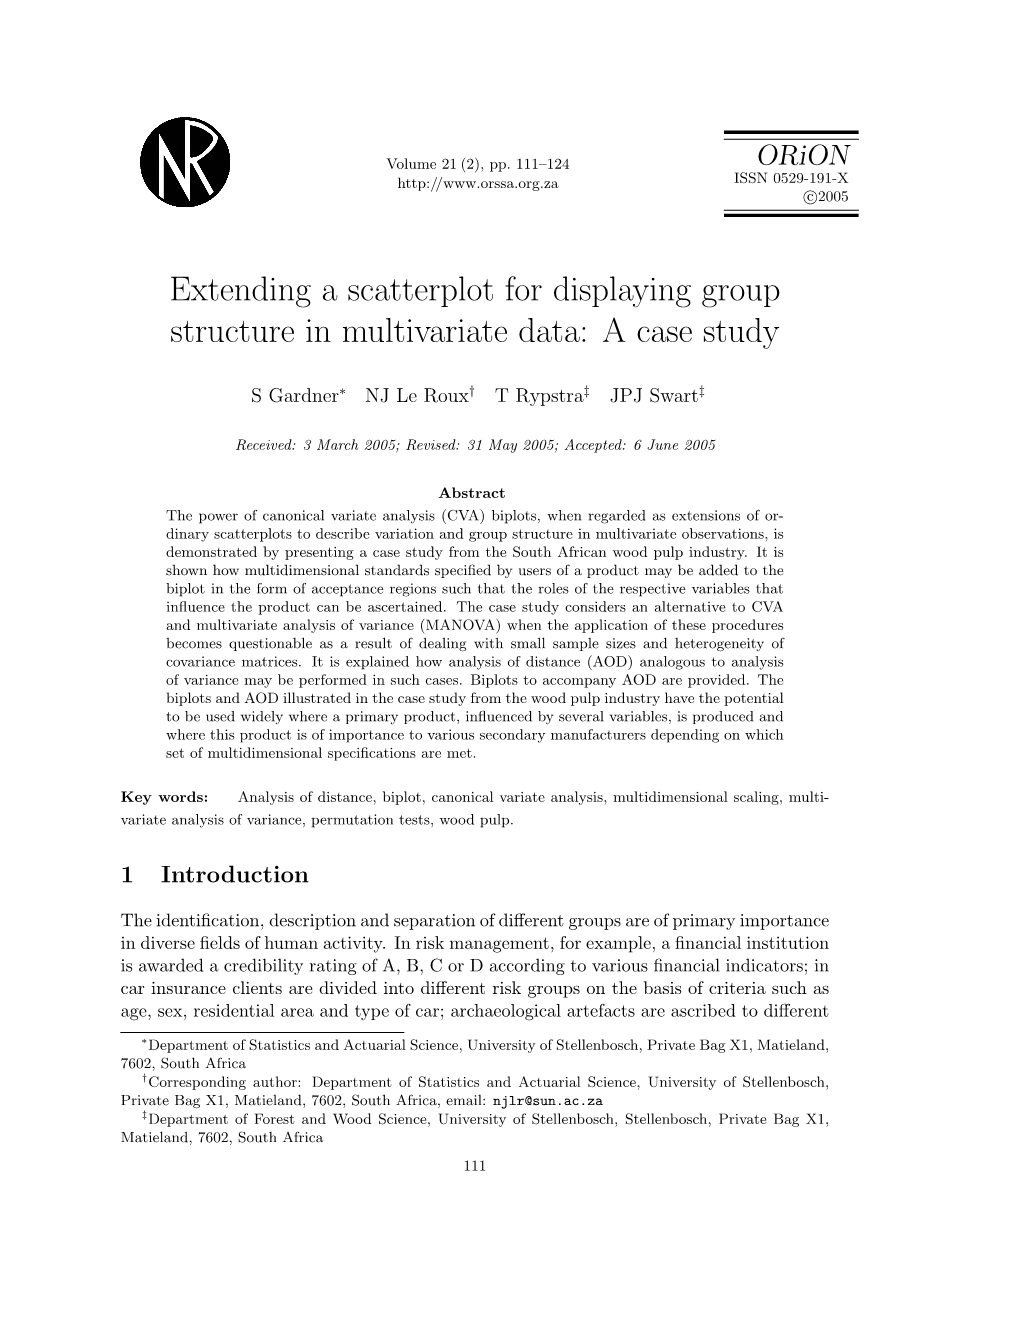 Extending a Scatterplot for Displaying Group Structure in Multivariate Data: a Case Study